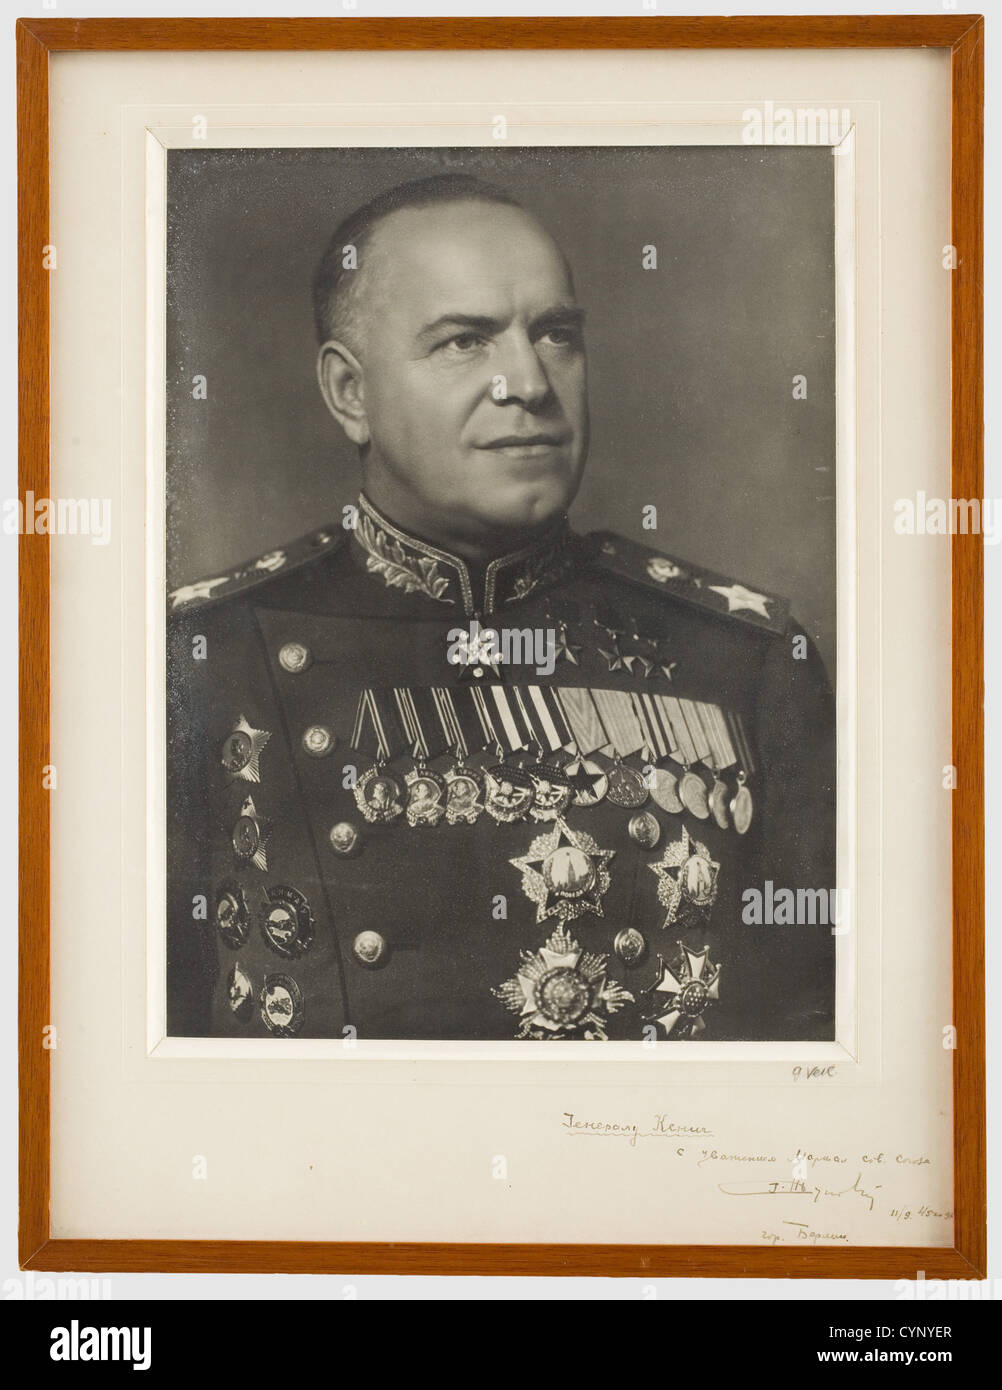 Marshal Georgy Konstantinovich Zhukov (1896 - 1974) - a photo with dedication to General Koenig, Portrait picture in marshal's uniform with numerous medals. The mount with a Cyrillic dedication handwritten in dark ink 'To the French General Koenig, respectfully Marshal Zhukov, City of Berlin 11/09/45'. On the lower right the photographer's signature 'G. Veil'. Framed and under glass, dimensions 55 x 42 cm. Marshal Zhukov was head of the general staff and Soviet secretary of defence. He became known for successfully defending Moscow and emerging victorious in th, Stock Photo